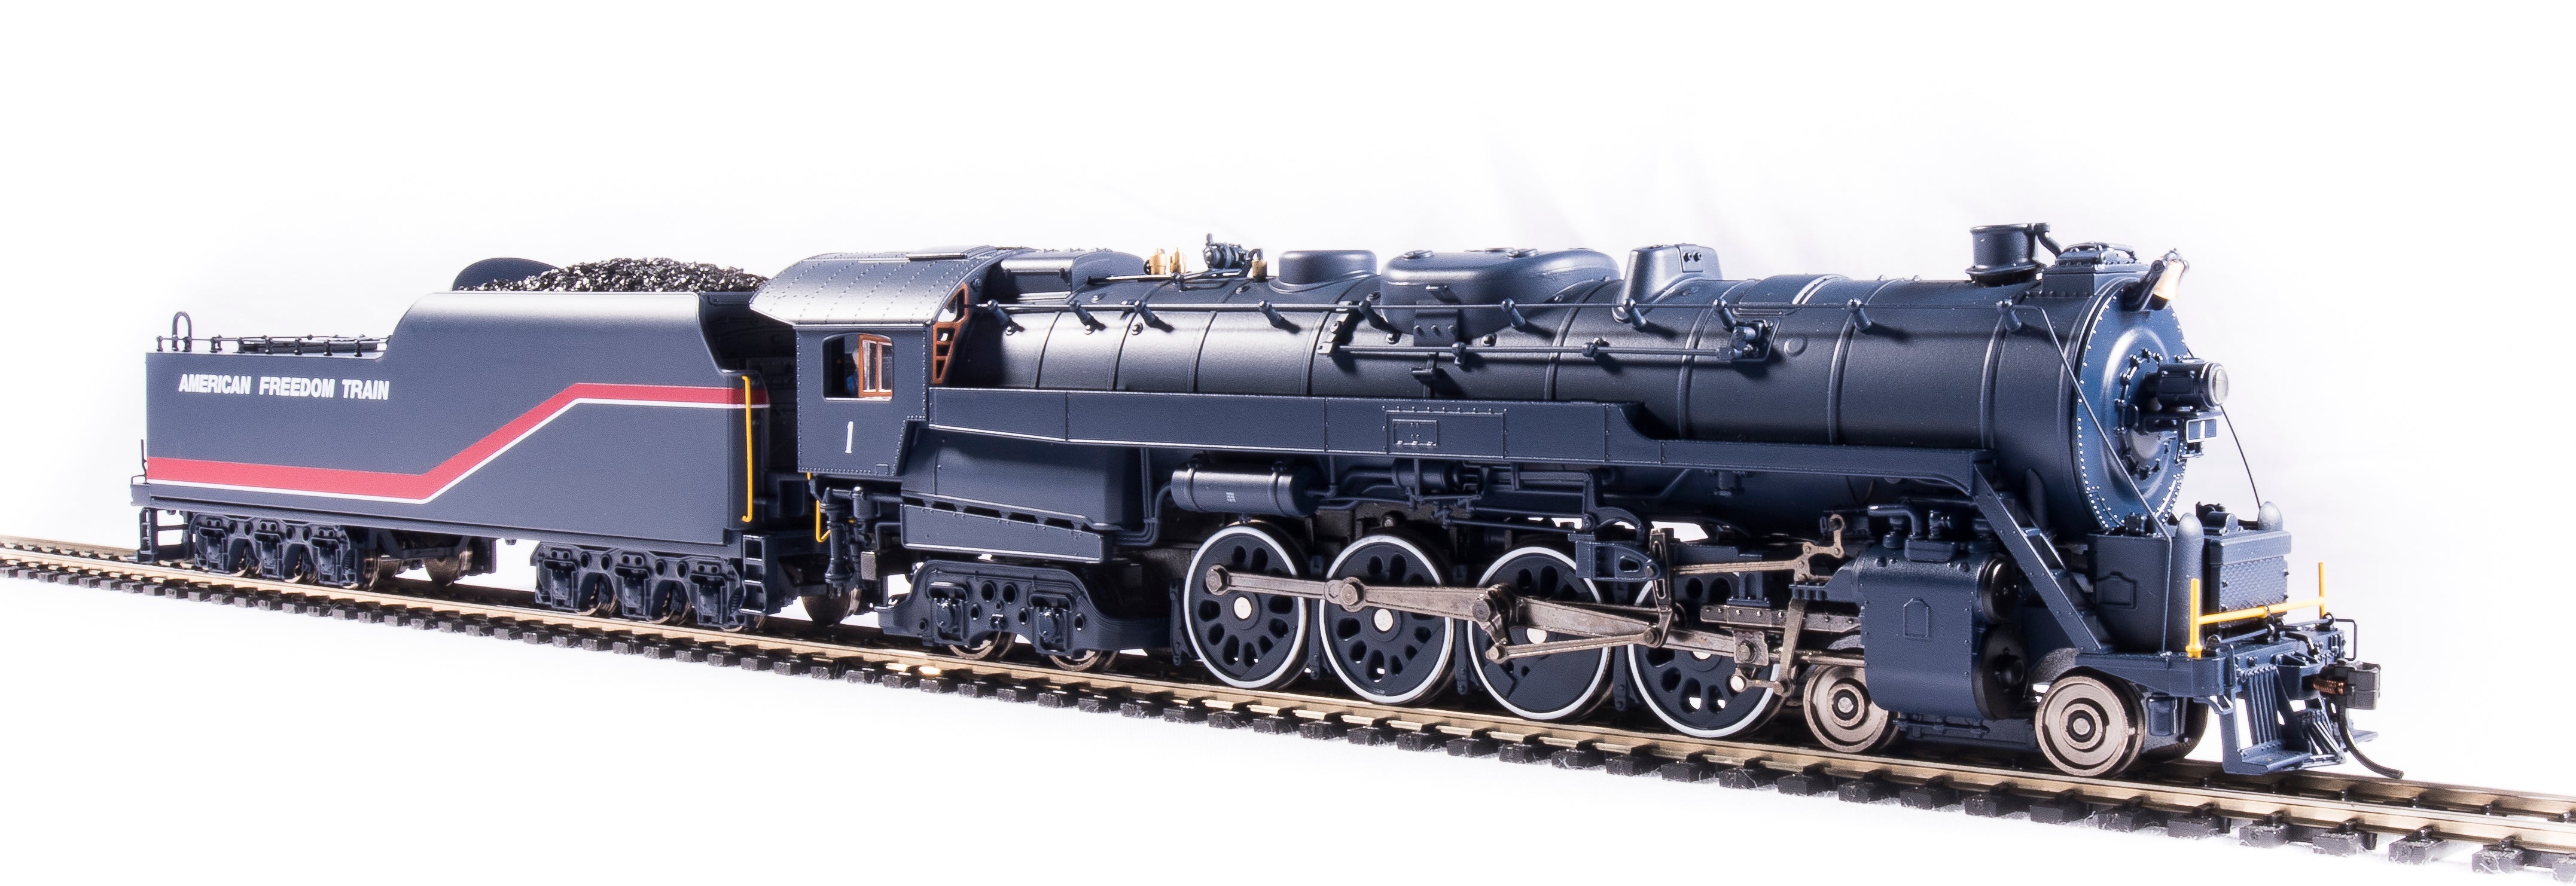 6808 Reading T1 4-8-4, American Freedom Train #1, Early 1975 Version, Paragon4 Sound/DC/DCC, Smoke, HO